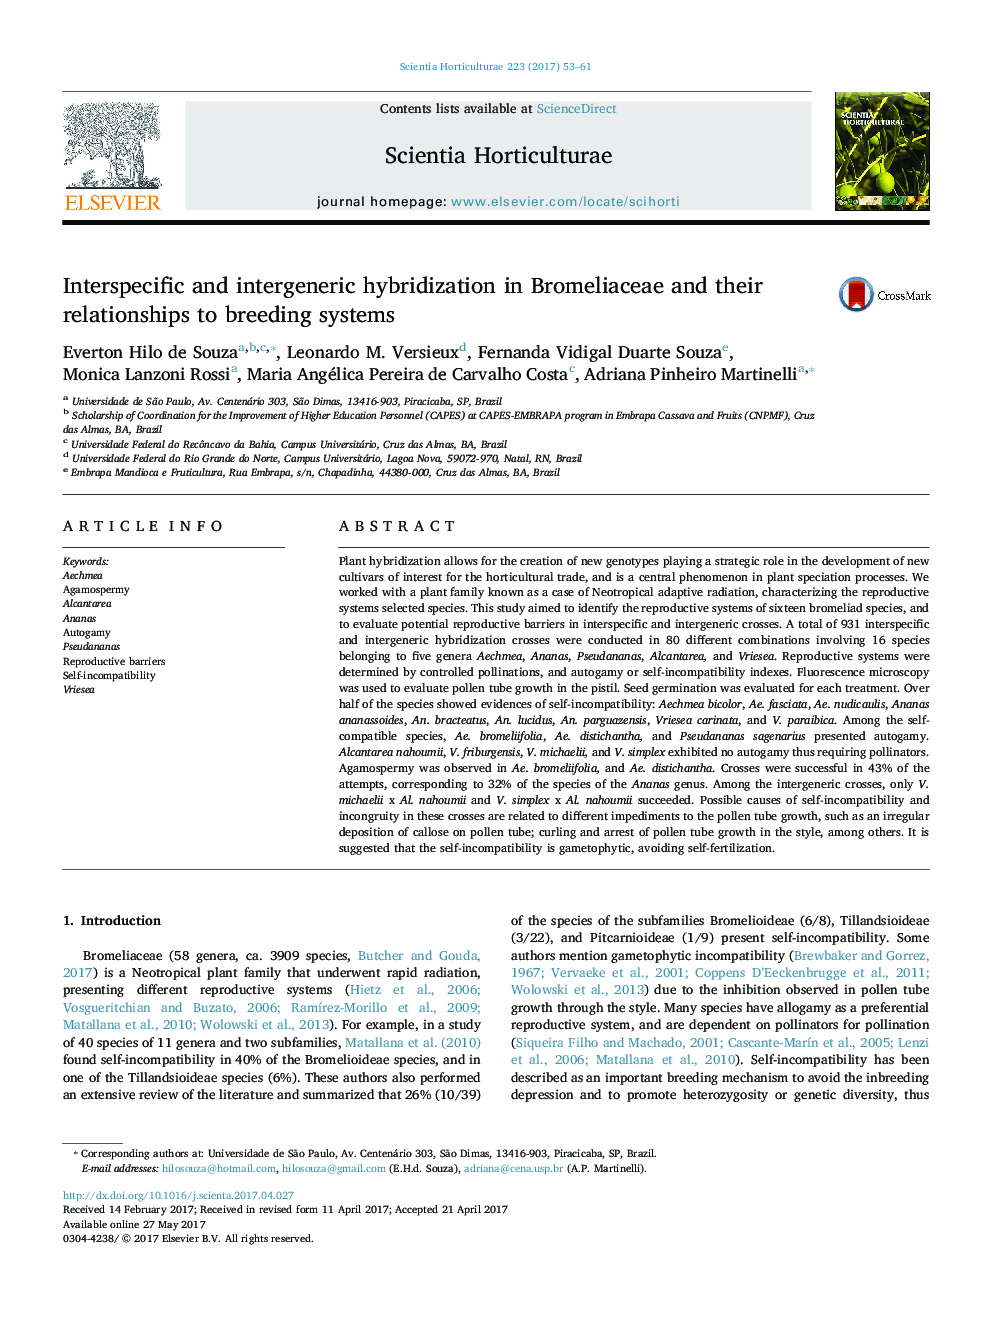 Interspecific and intergeneric hybridization in Bromeliaceae and their relationships to breeding systems